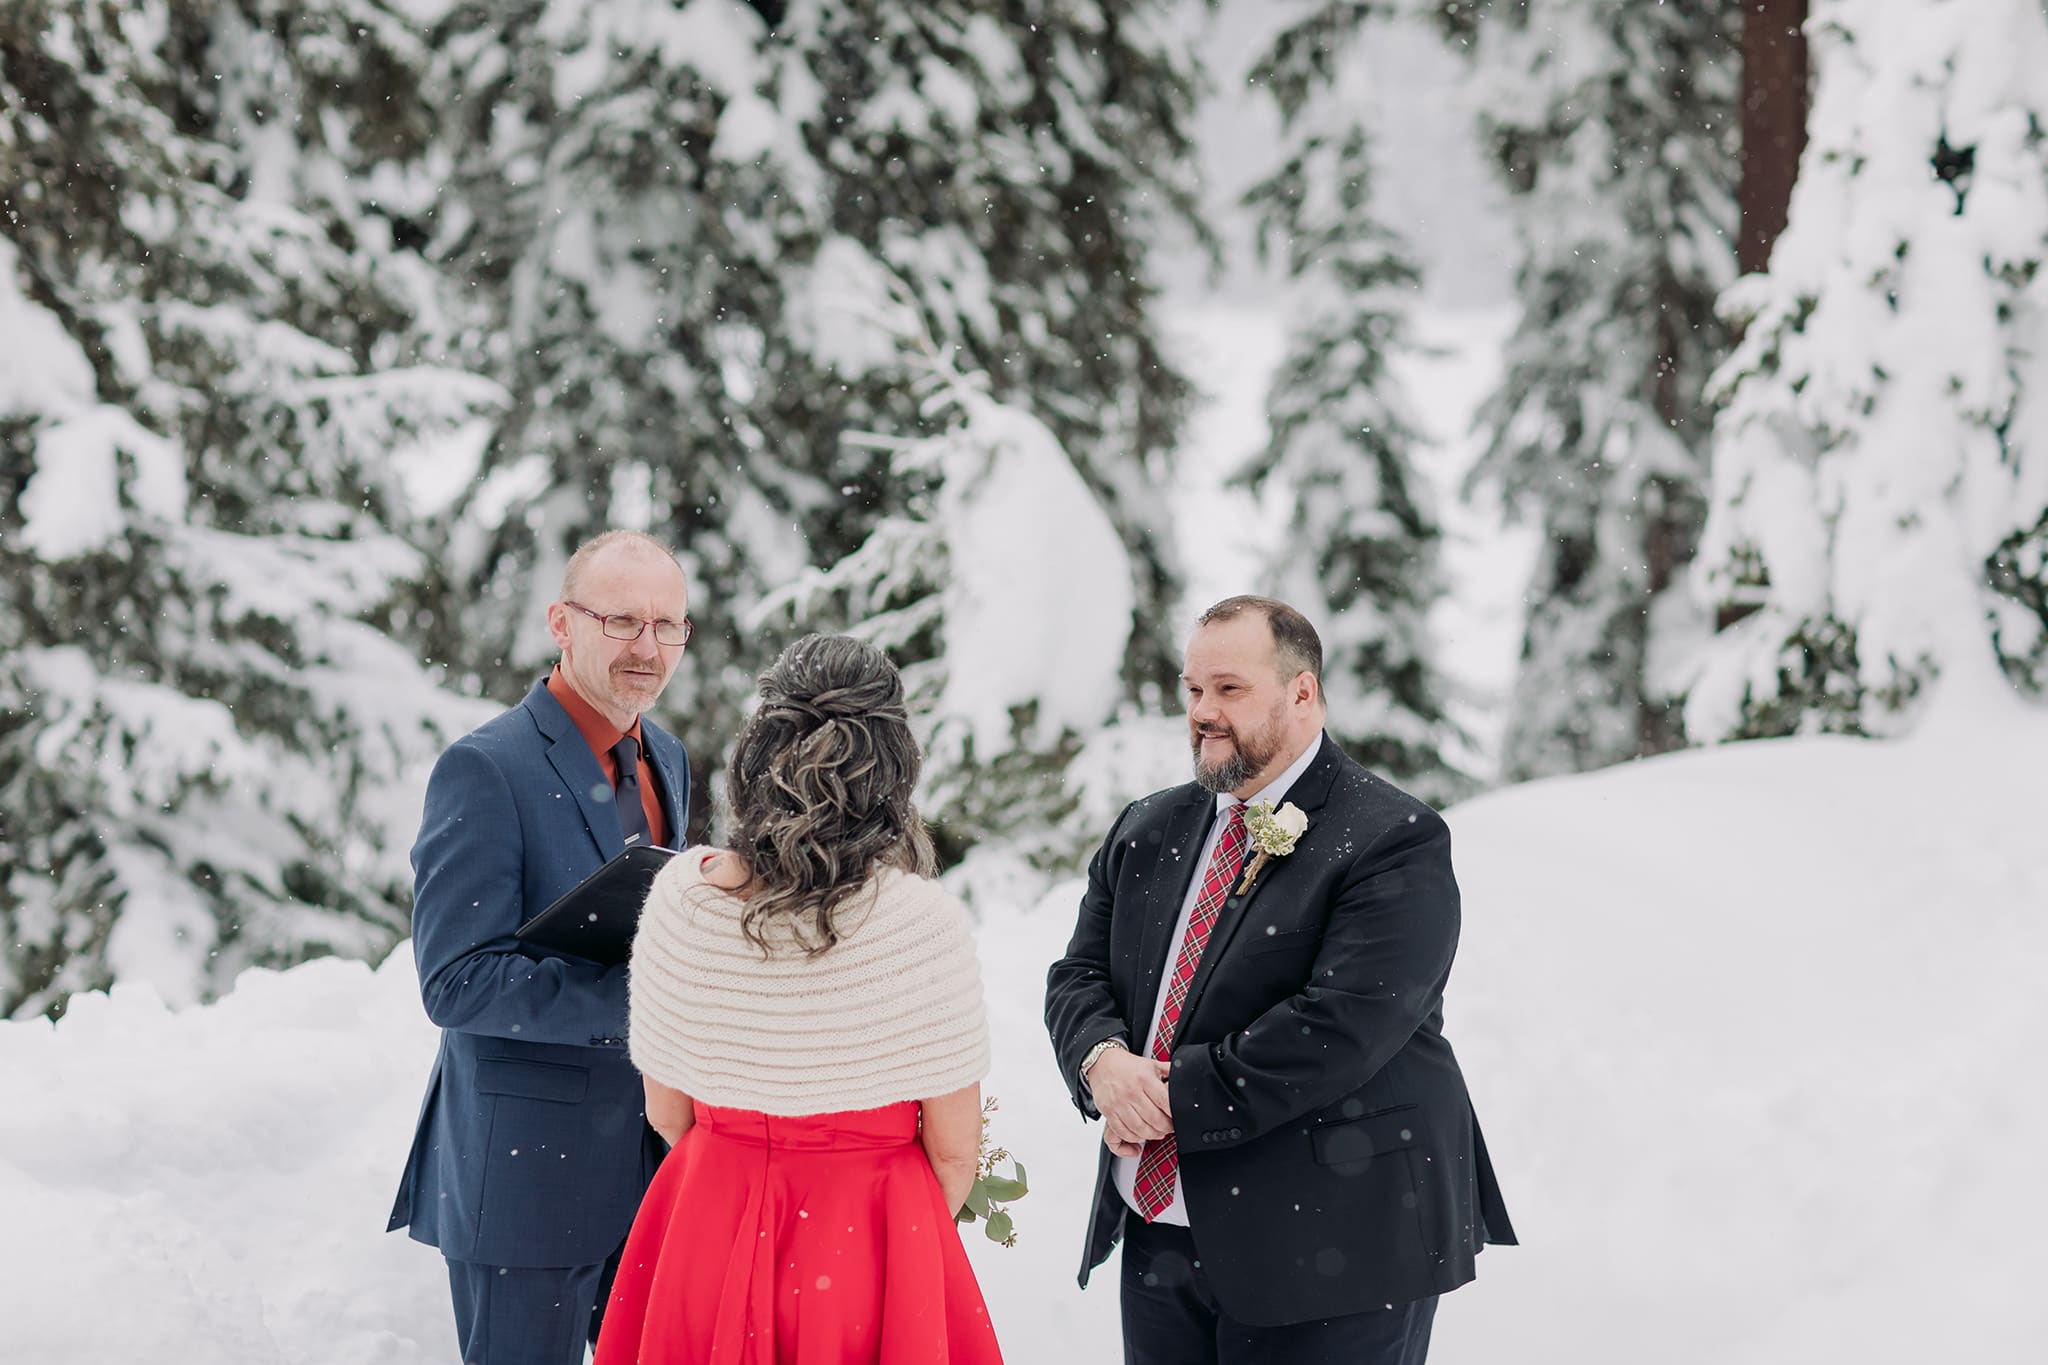 Emerald Lake Lodge winter outdoor wedding ceremony at the snowy Viewpoint